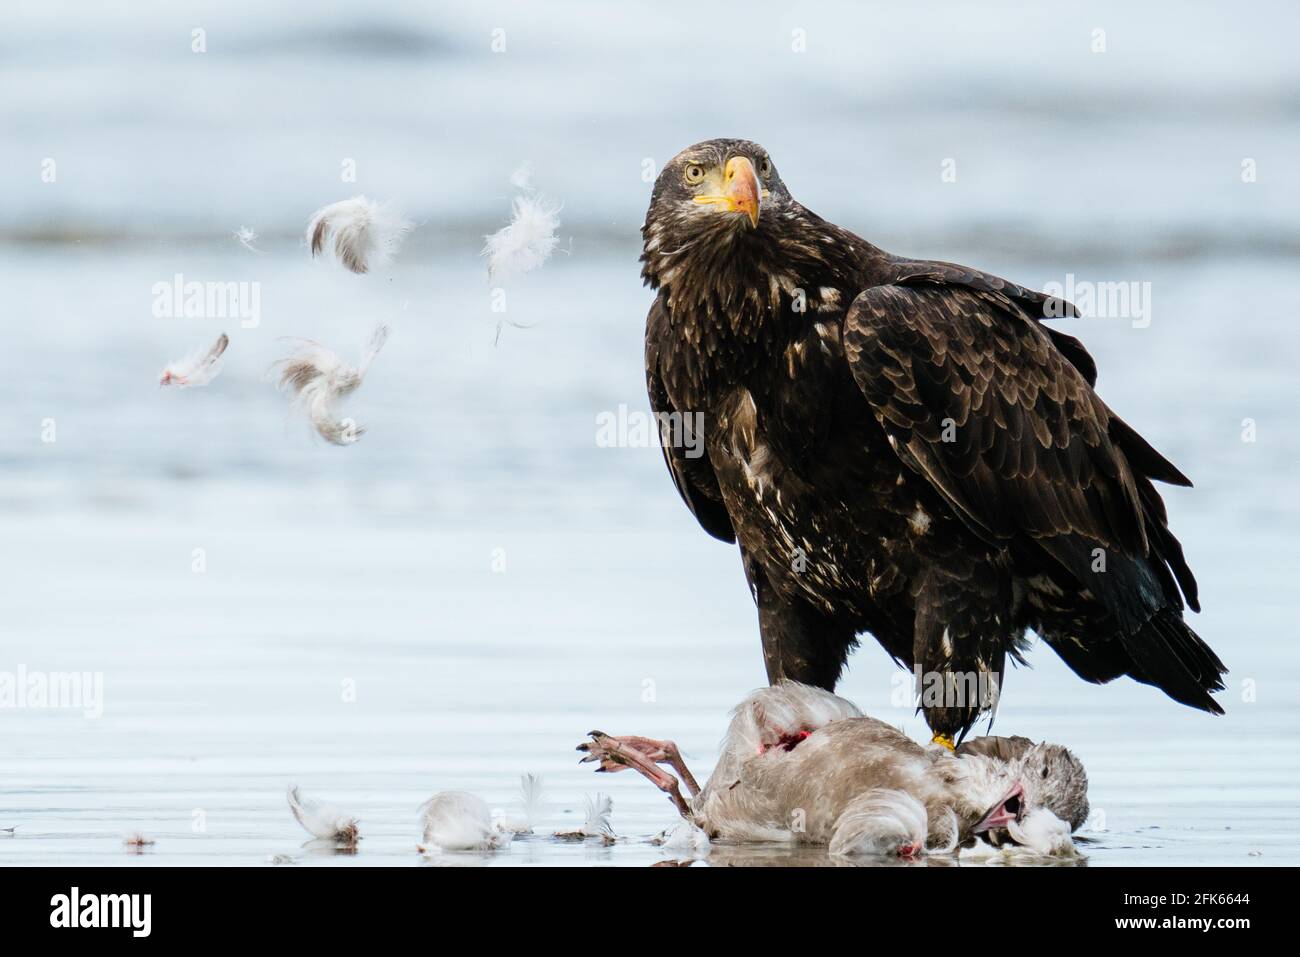 A bald eagle standing over a sea gull on the beach Stock Photo